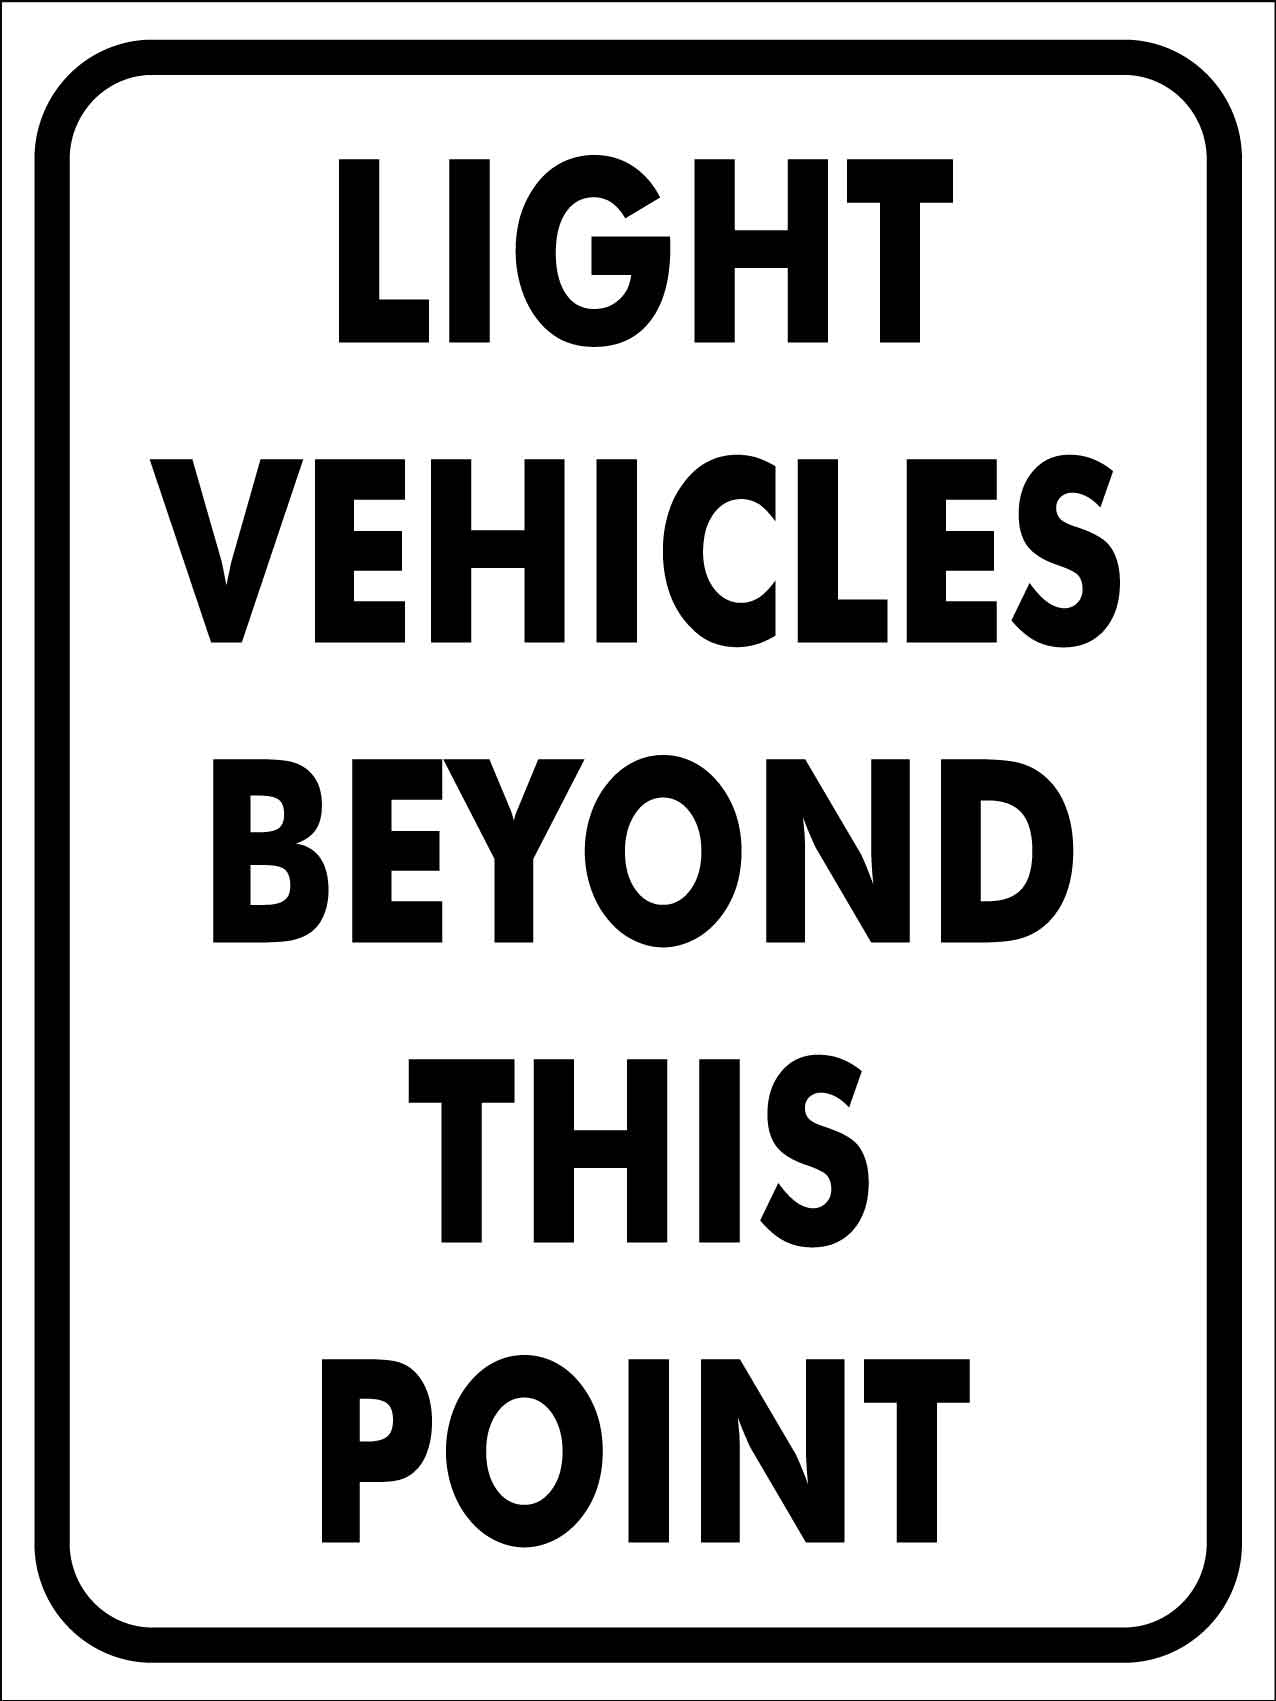 Light Vehicles Beyond This Point Sign